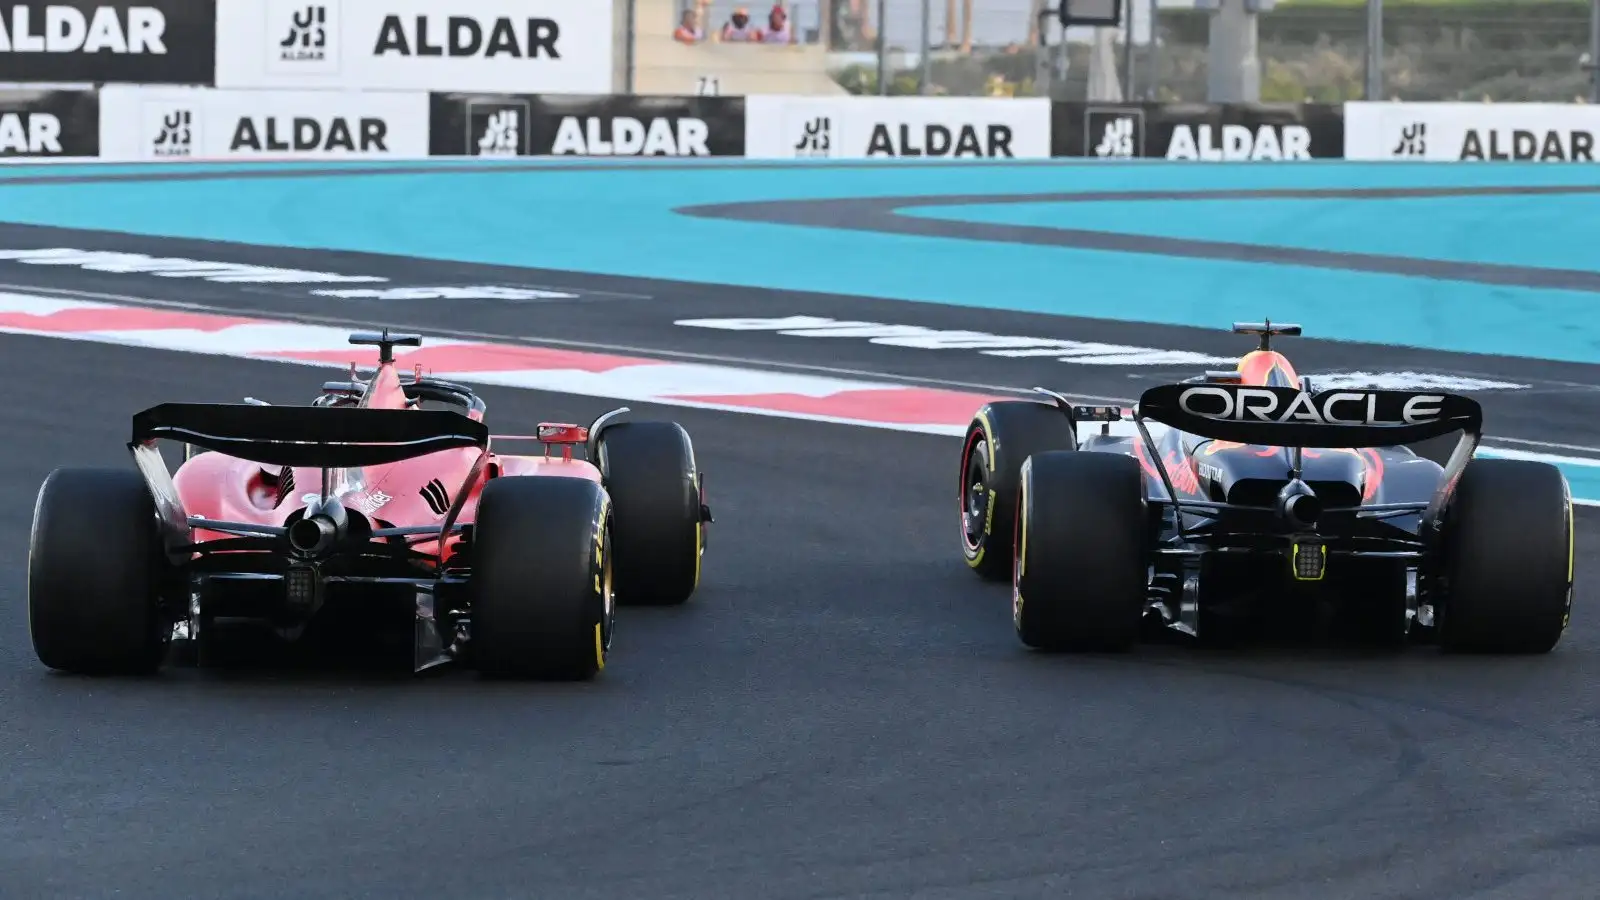 Ferrari driver Charles Leclerc challenges Max Verstappen for the lead.